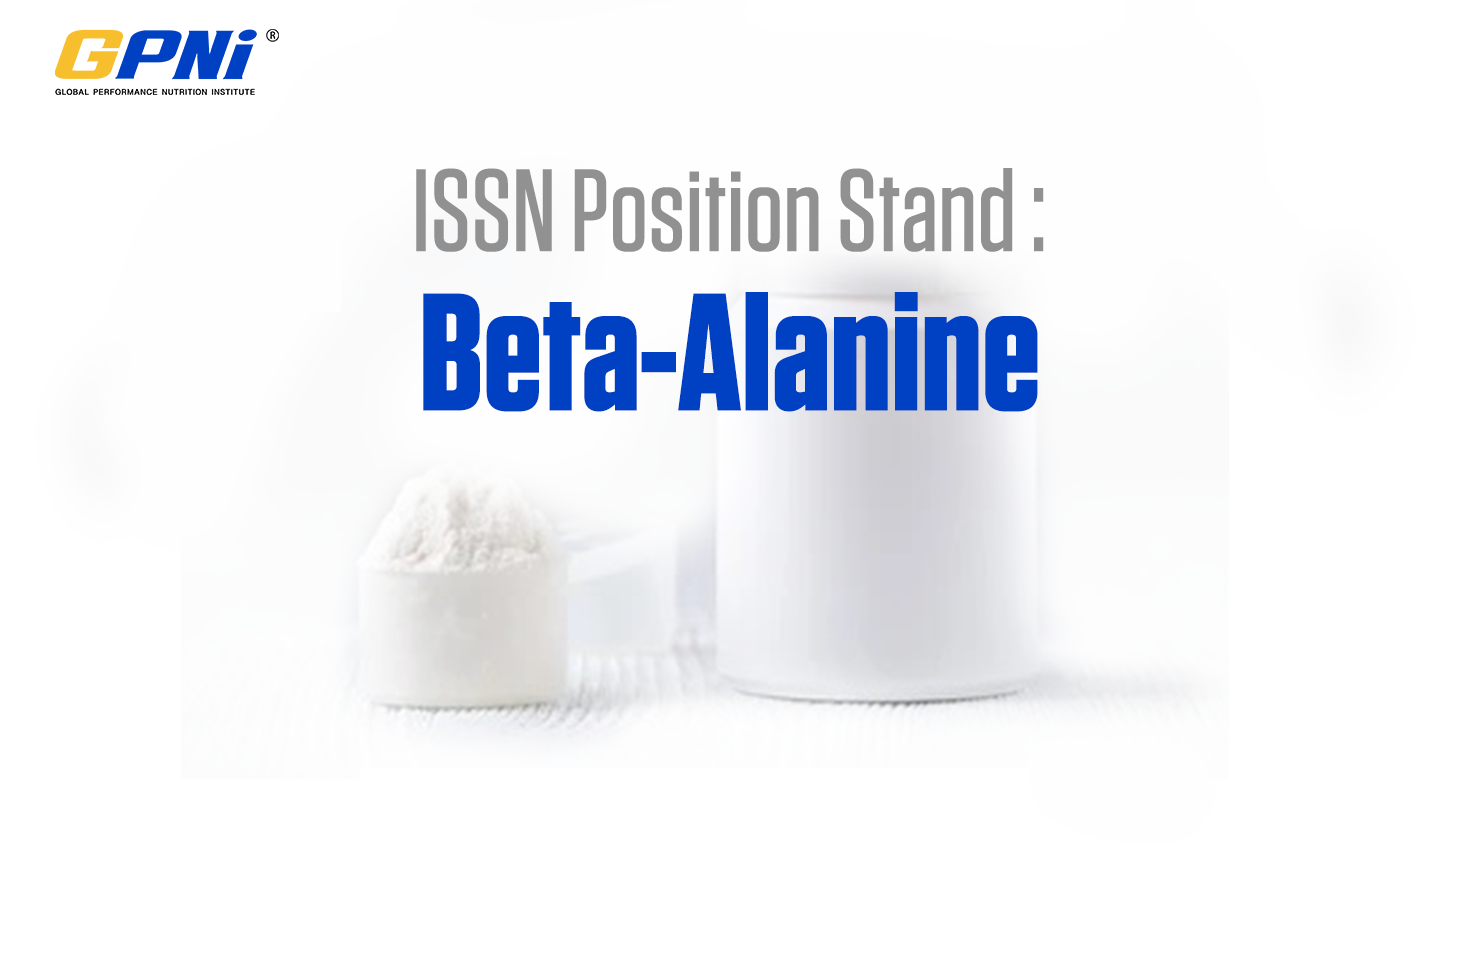 International society of sports nutrition position stand: Beta